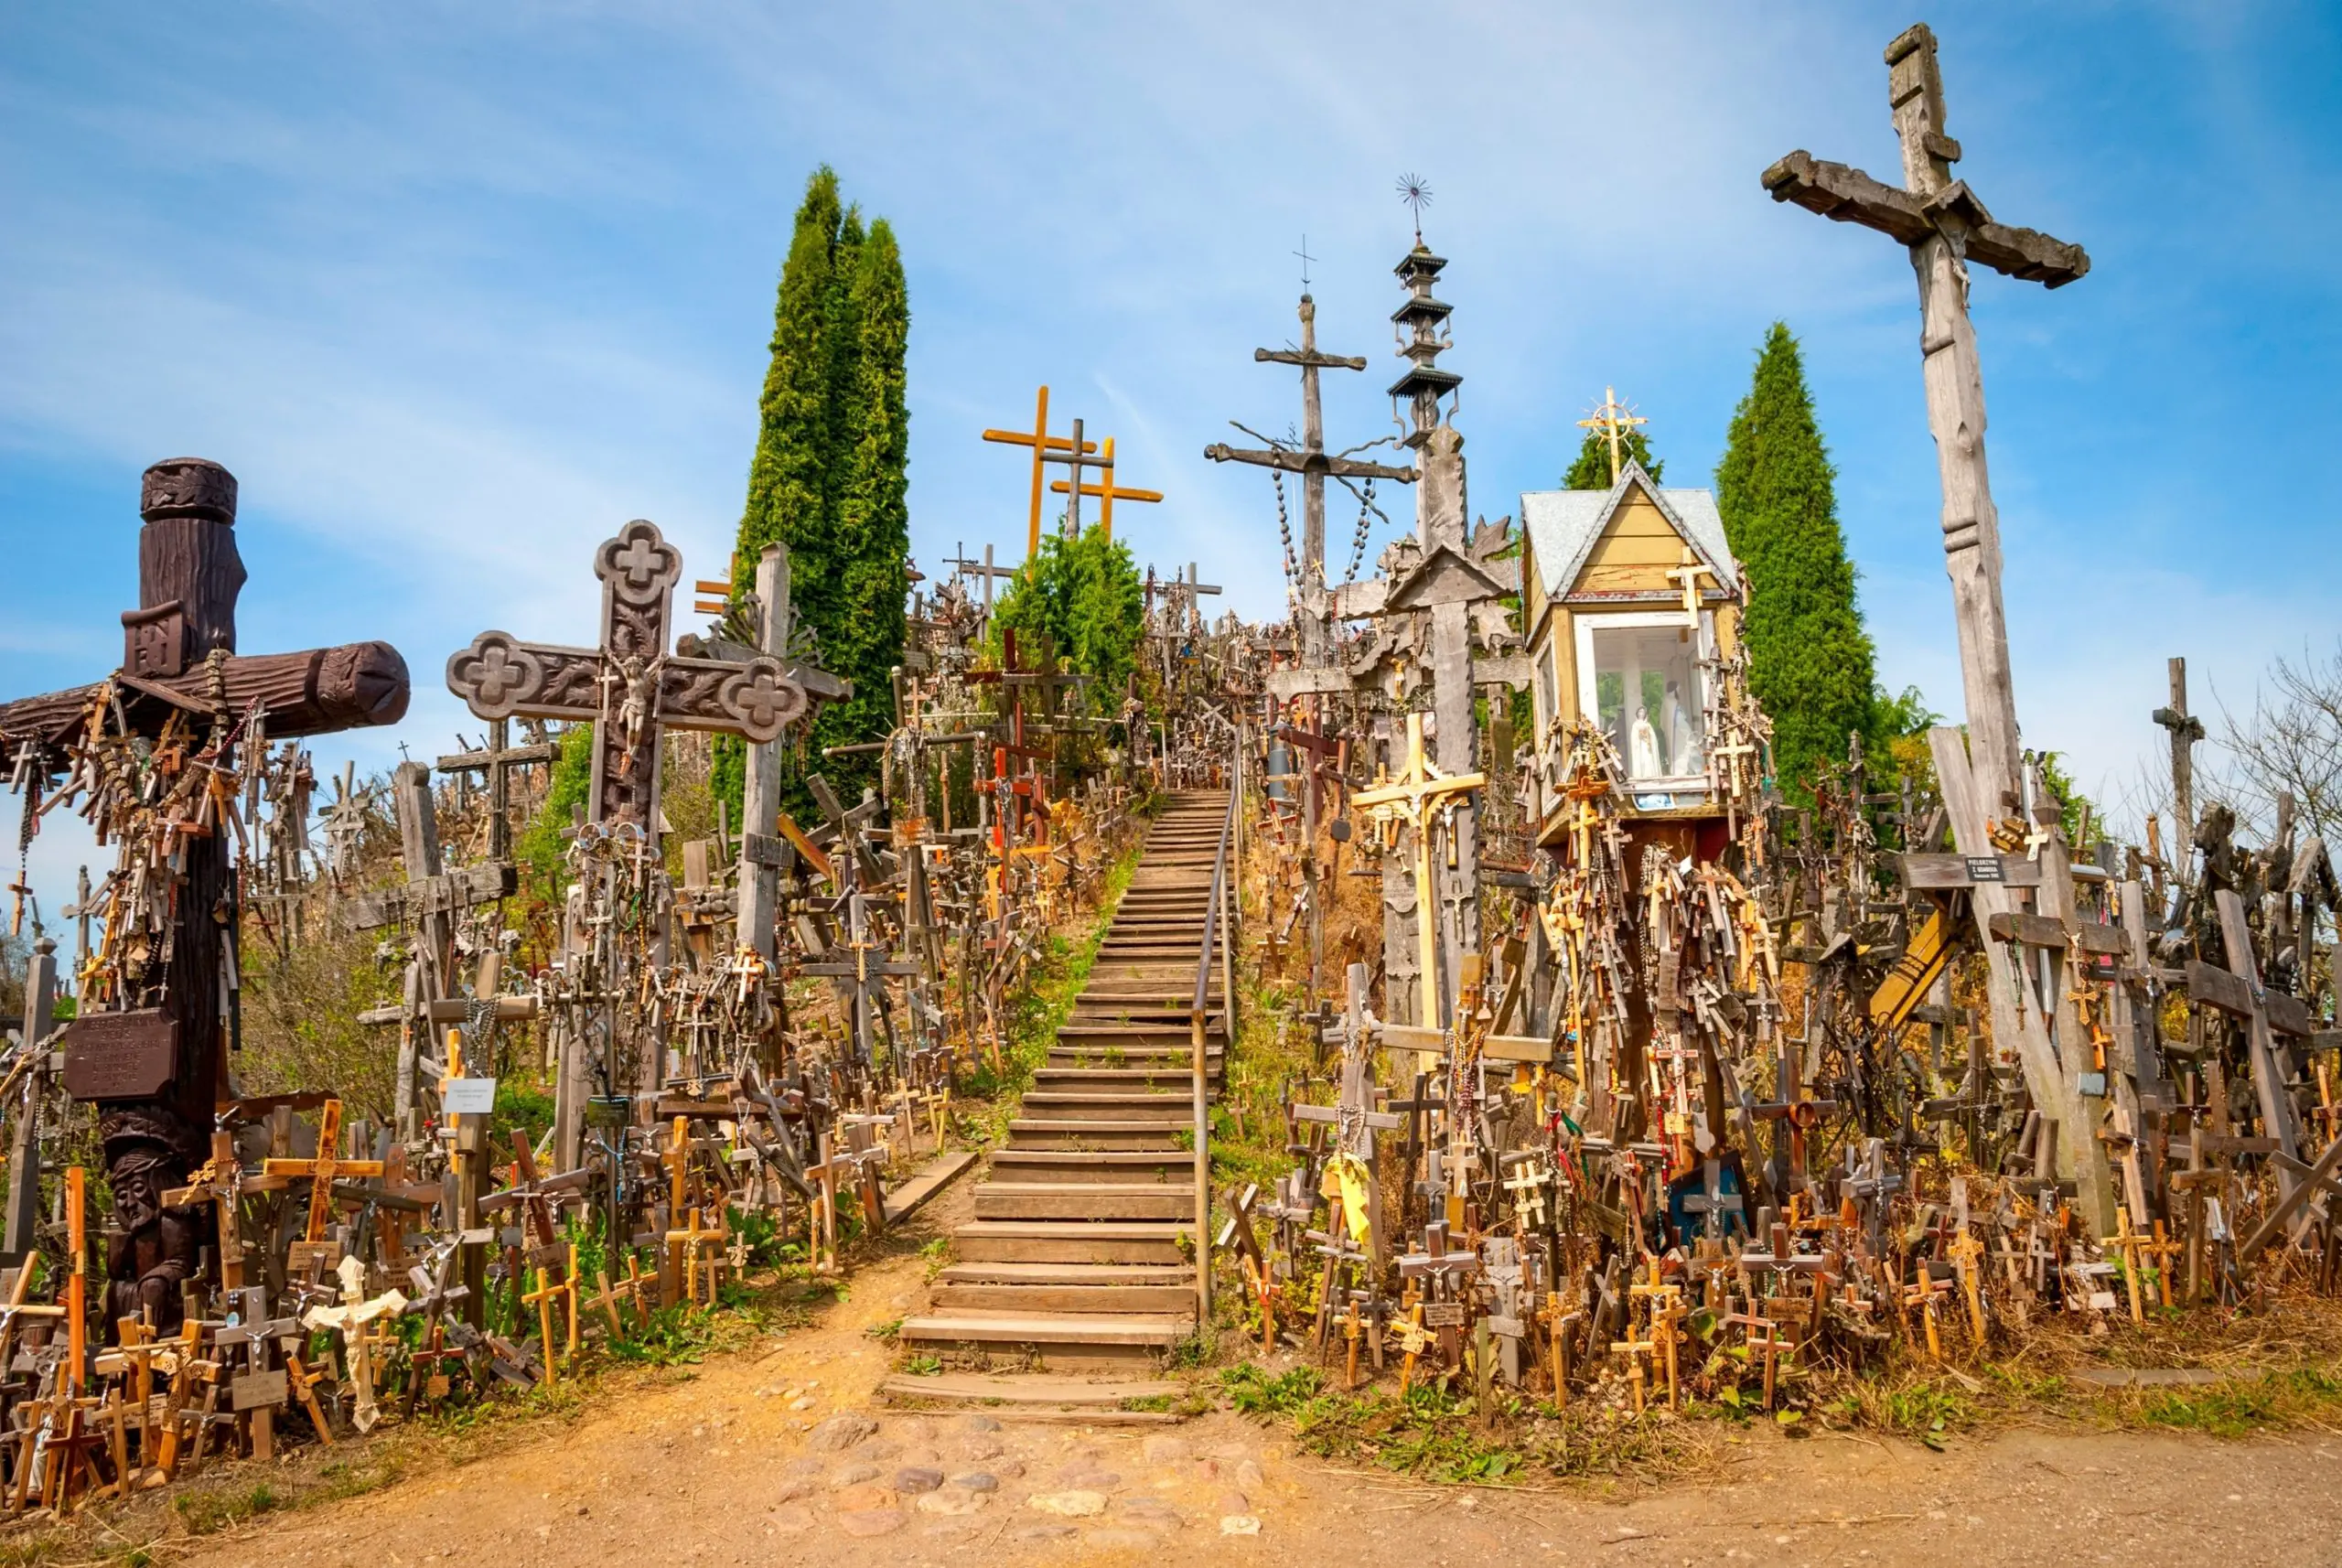 Hill of Crosses, Lithuania. From Shutterstock - By Ana Flasker